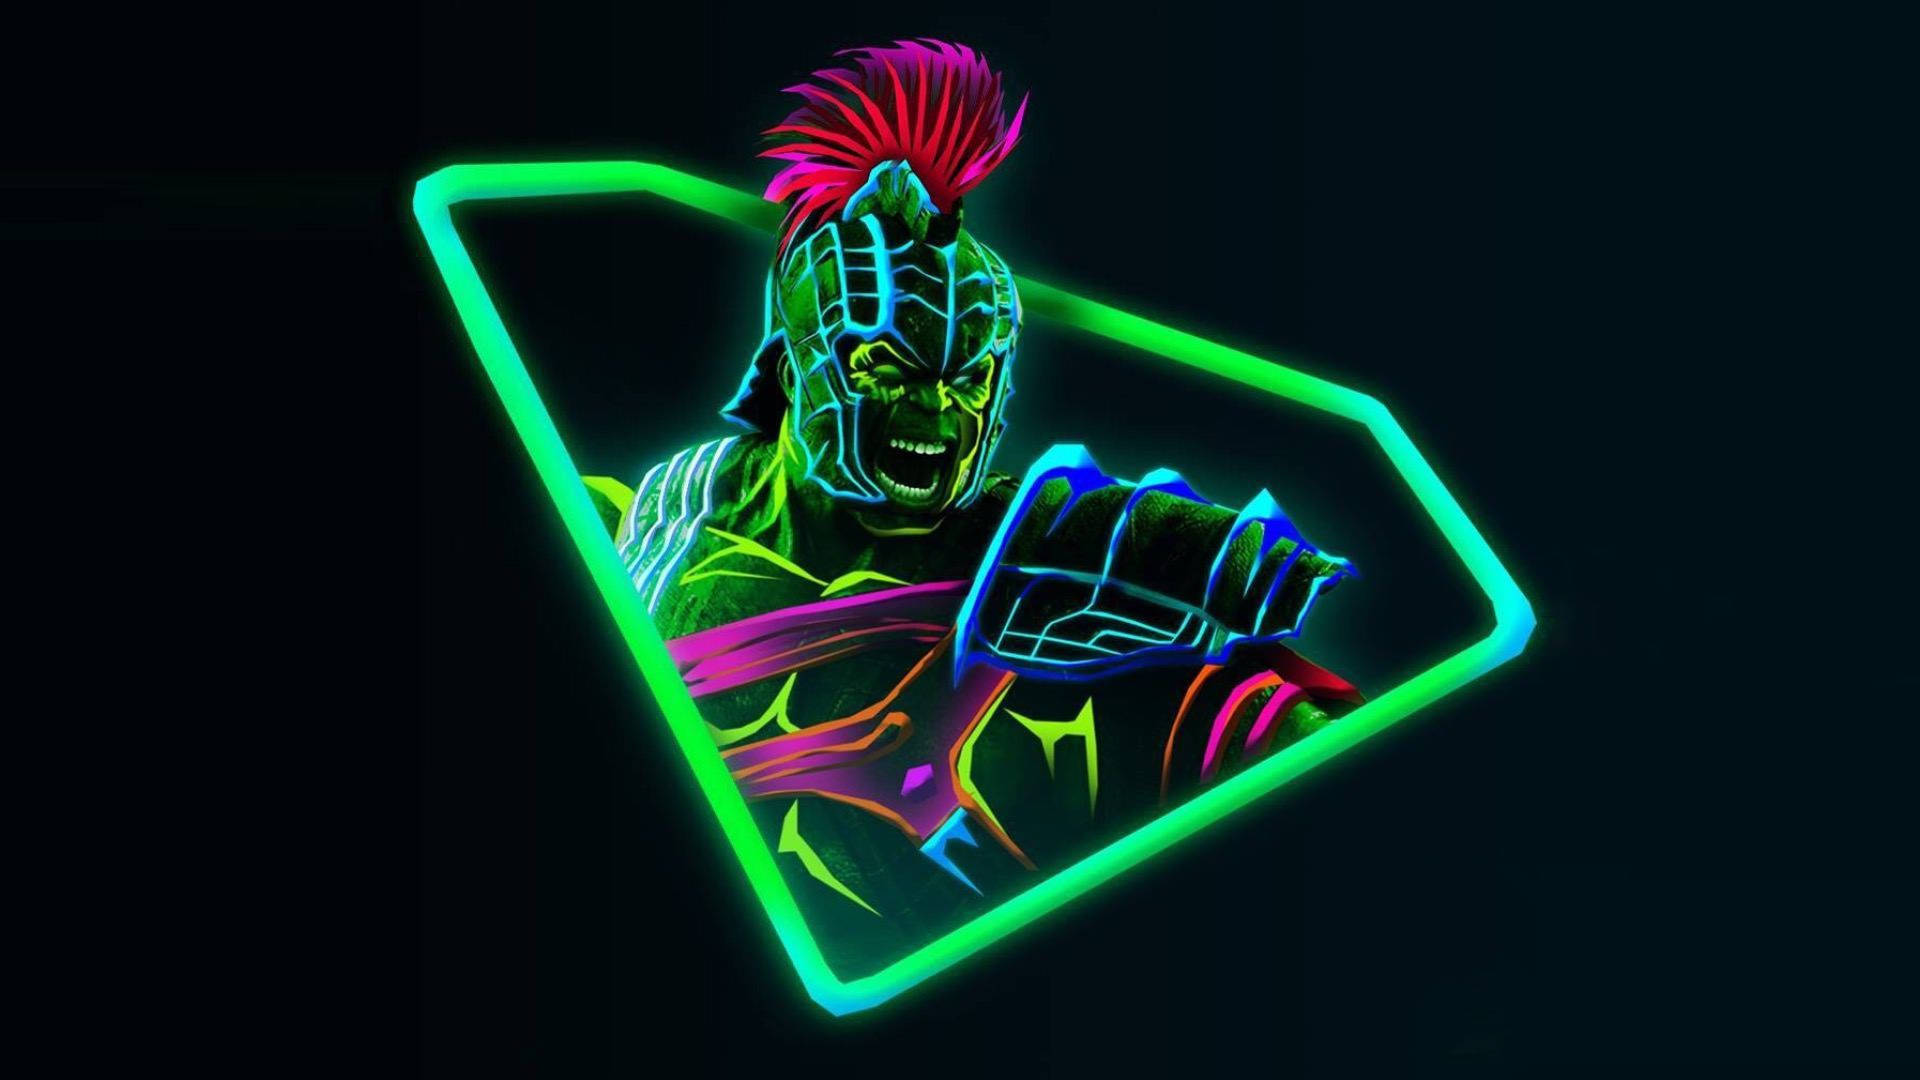 Avengers characters Hulk drawing made of neon lights on a black background.